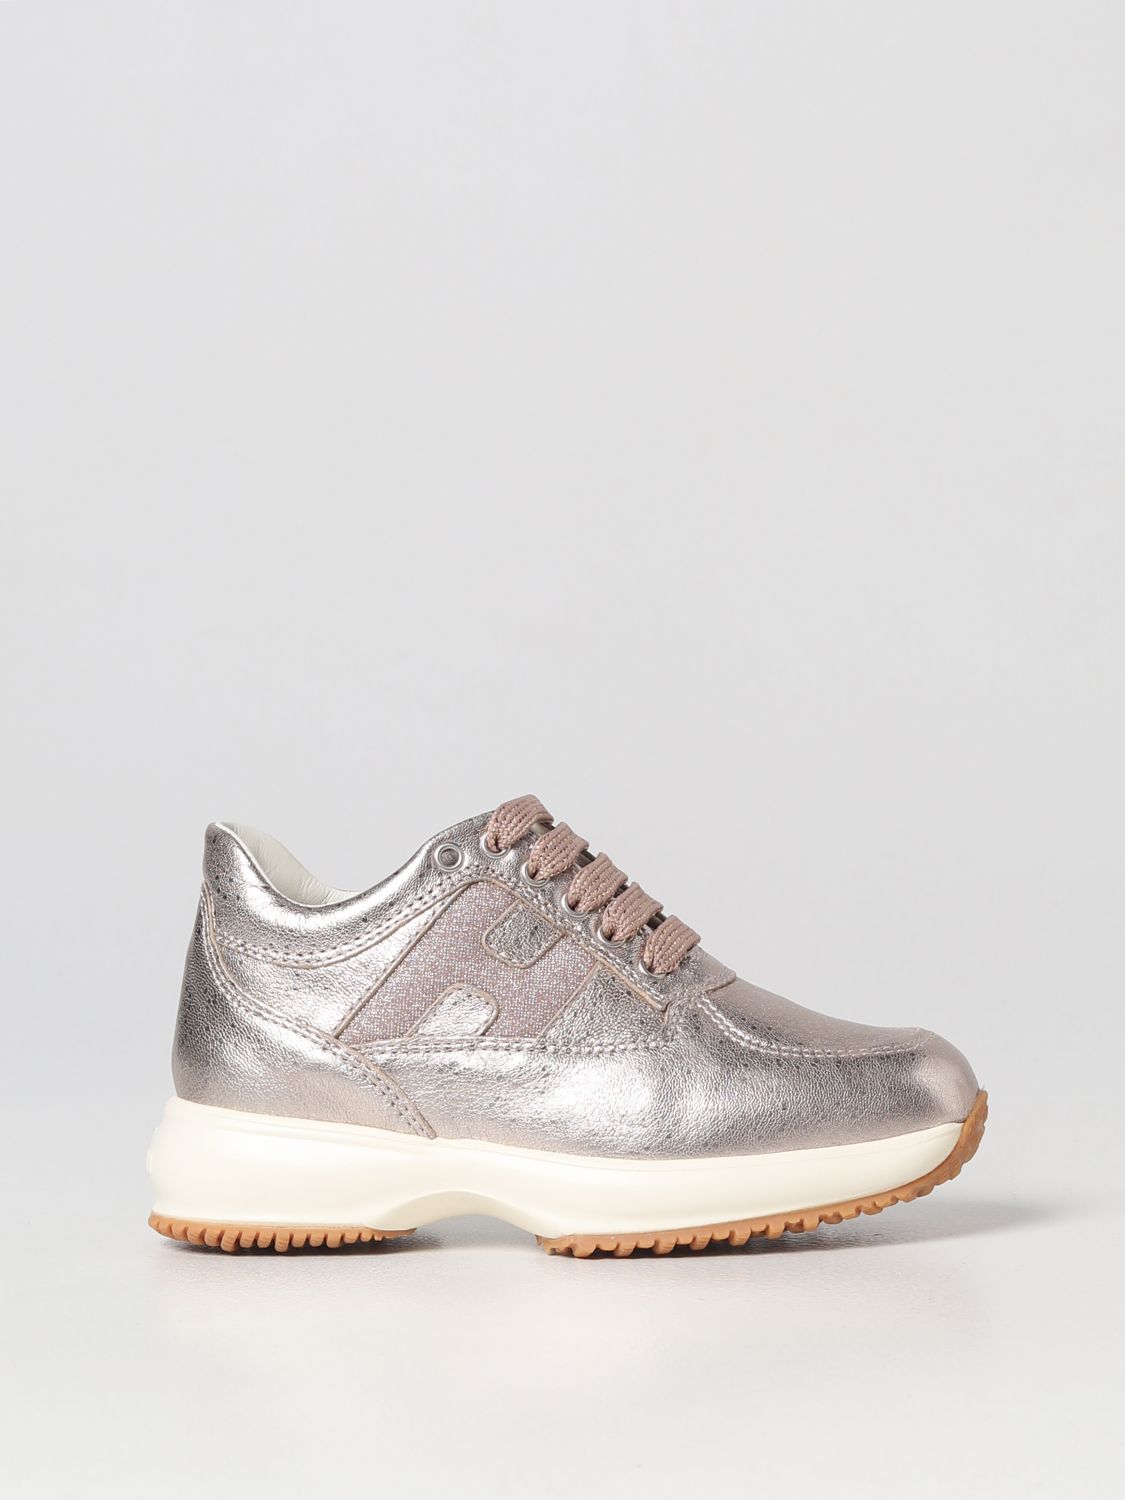 Knop Negende diepvries HOGAN: shoes for boys - Gold | Hogan shoes HXC00N0O2402R9 online on  GIGLIO.COM